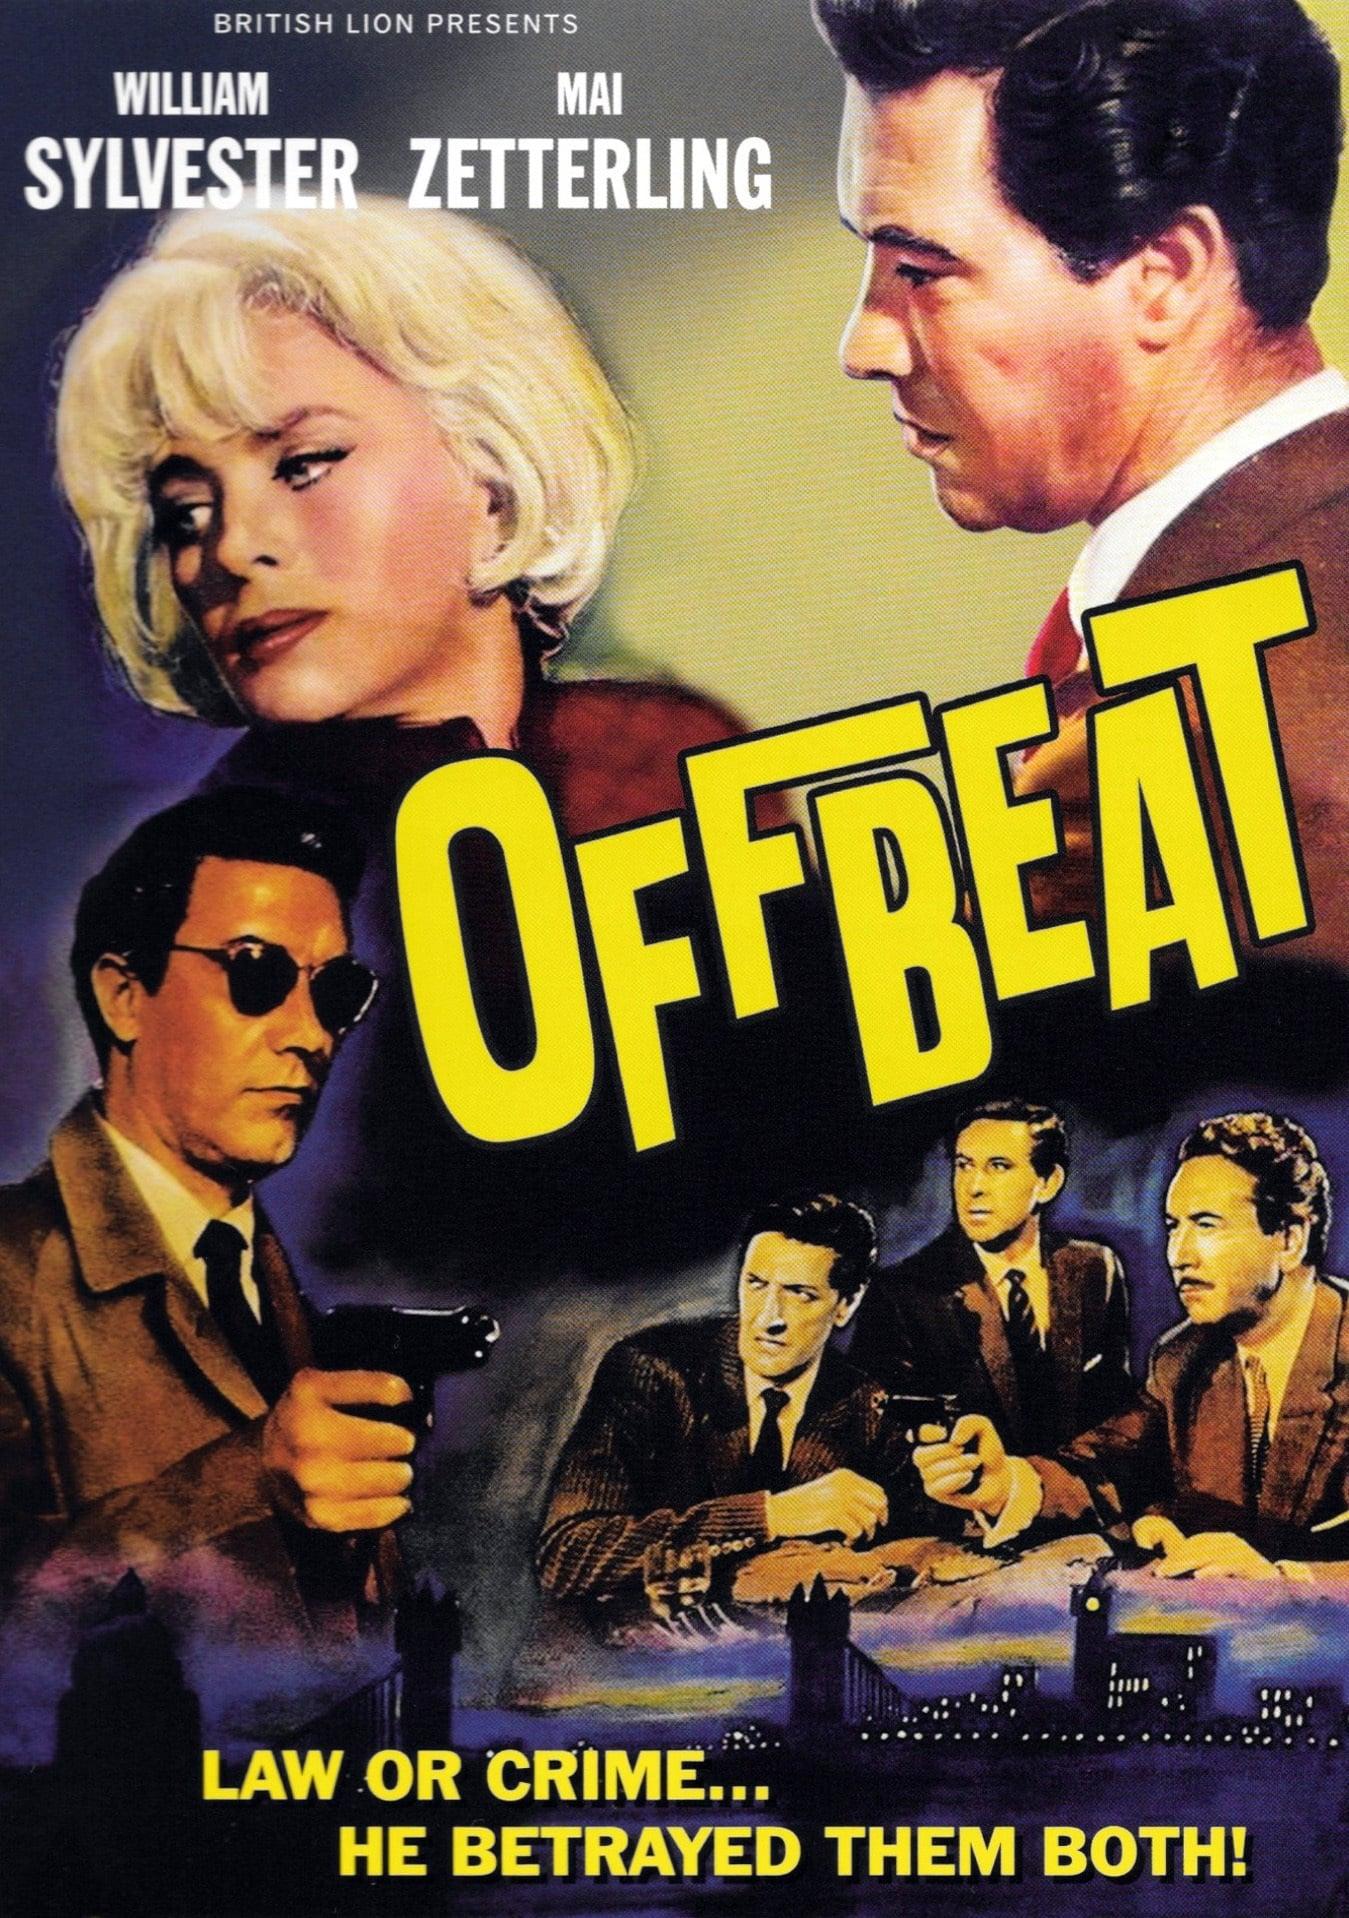 Offbeat poster